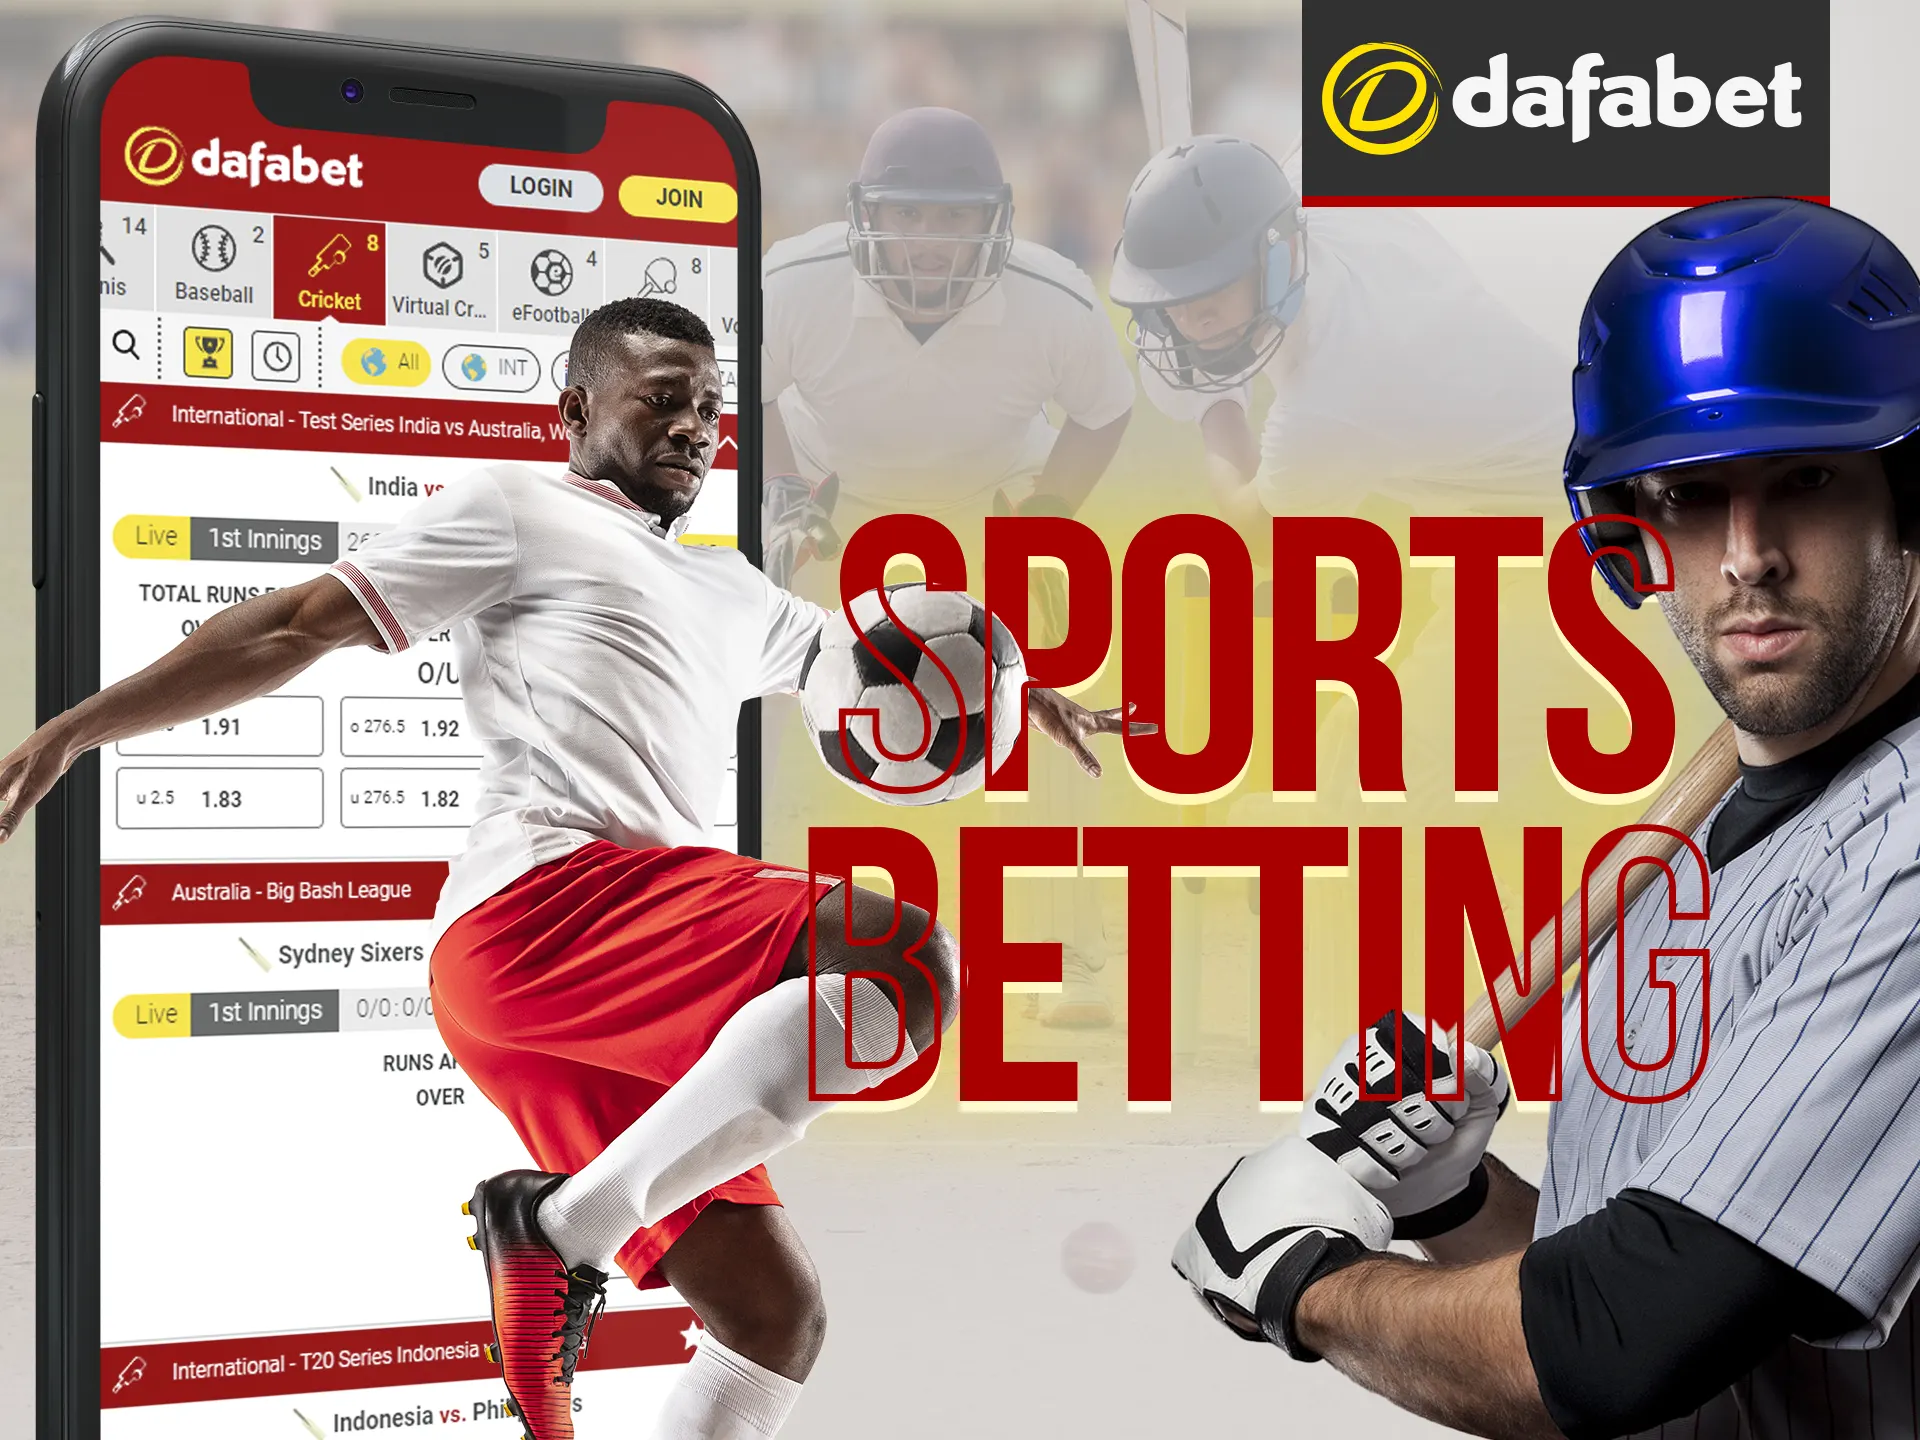 Bet on sports using a single account for cricket, soccer, tennis, and more.